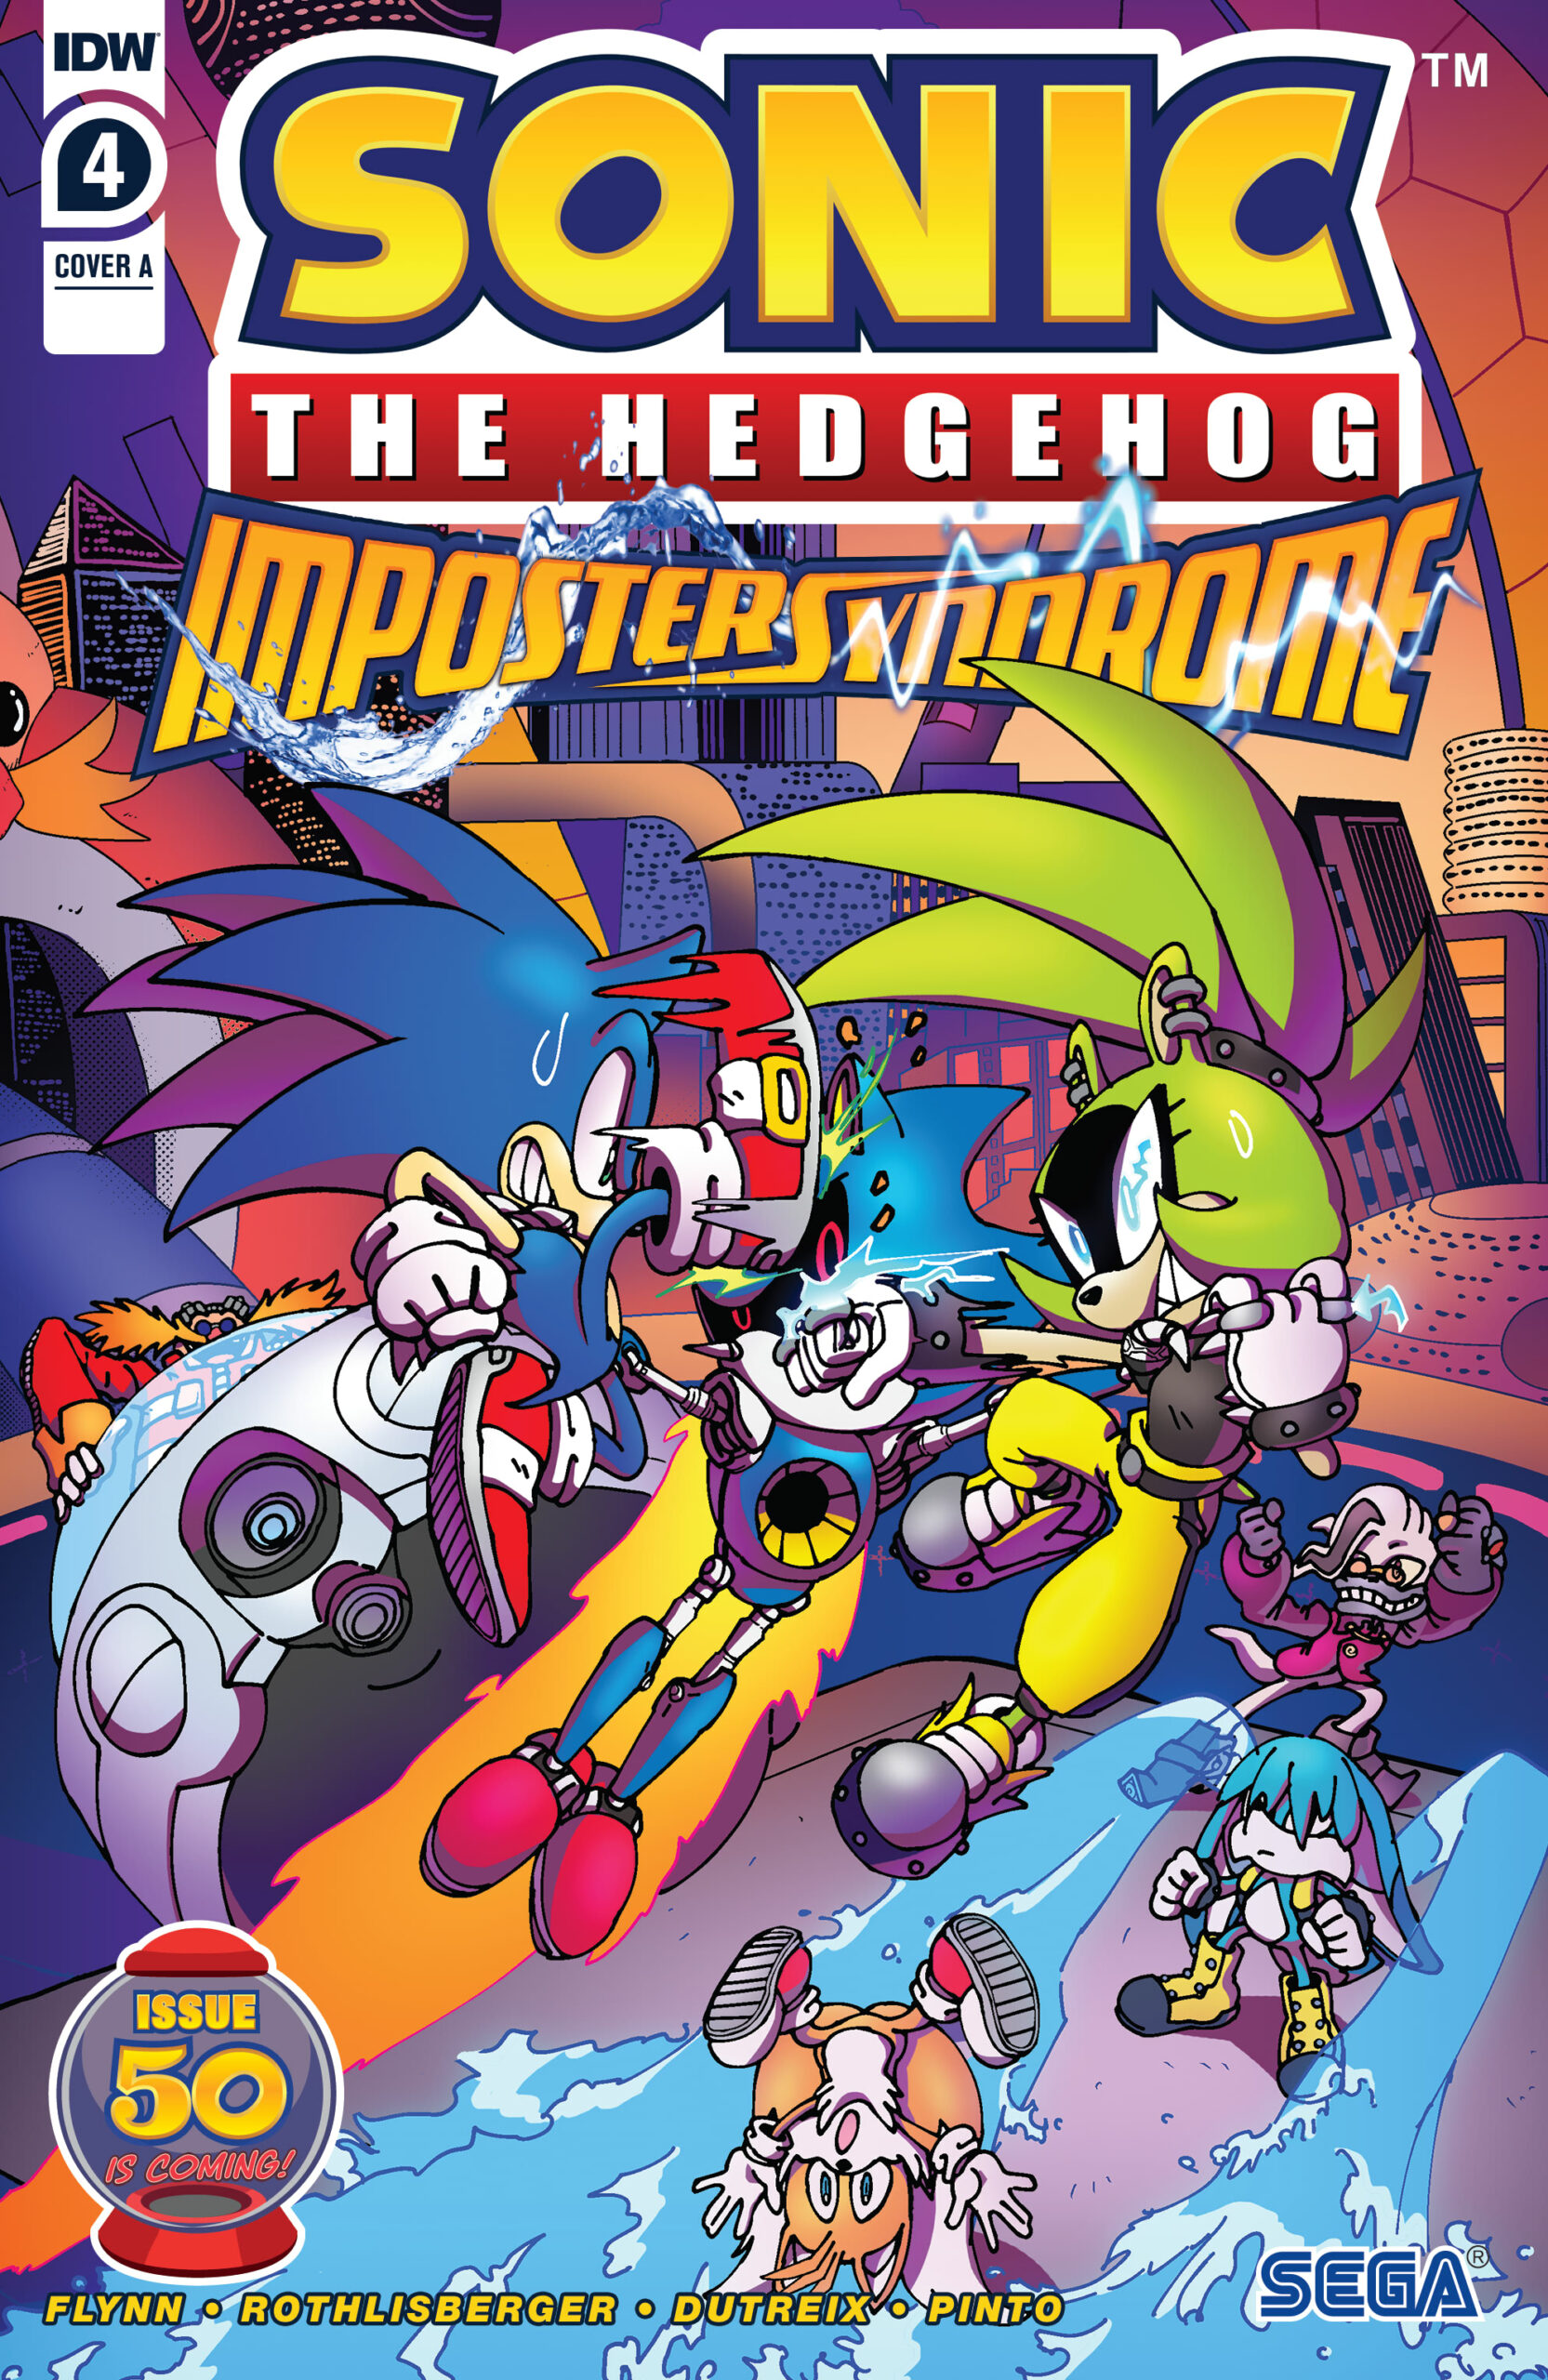 Read Comic Online Sonic The Hedgehog Imposter Syndrome 